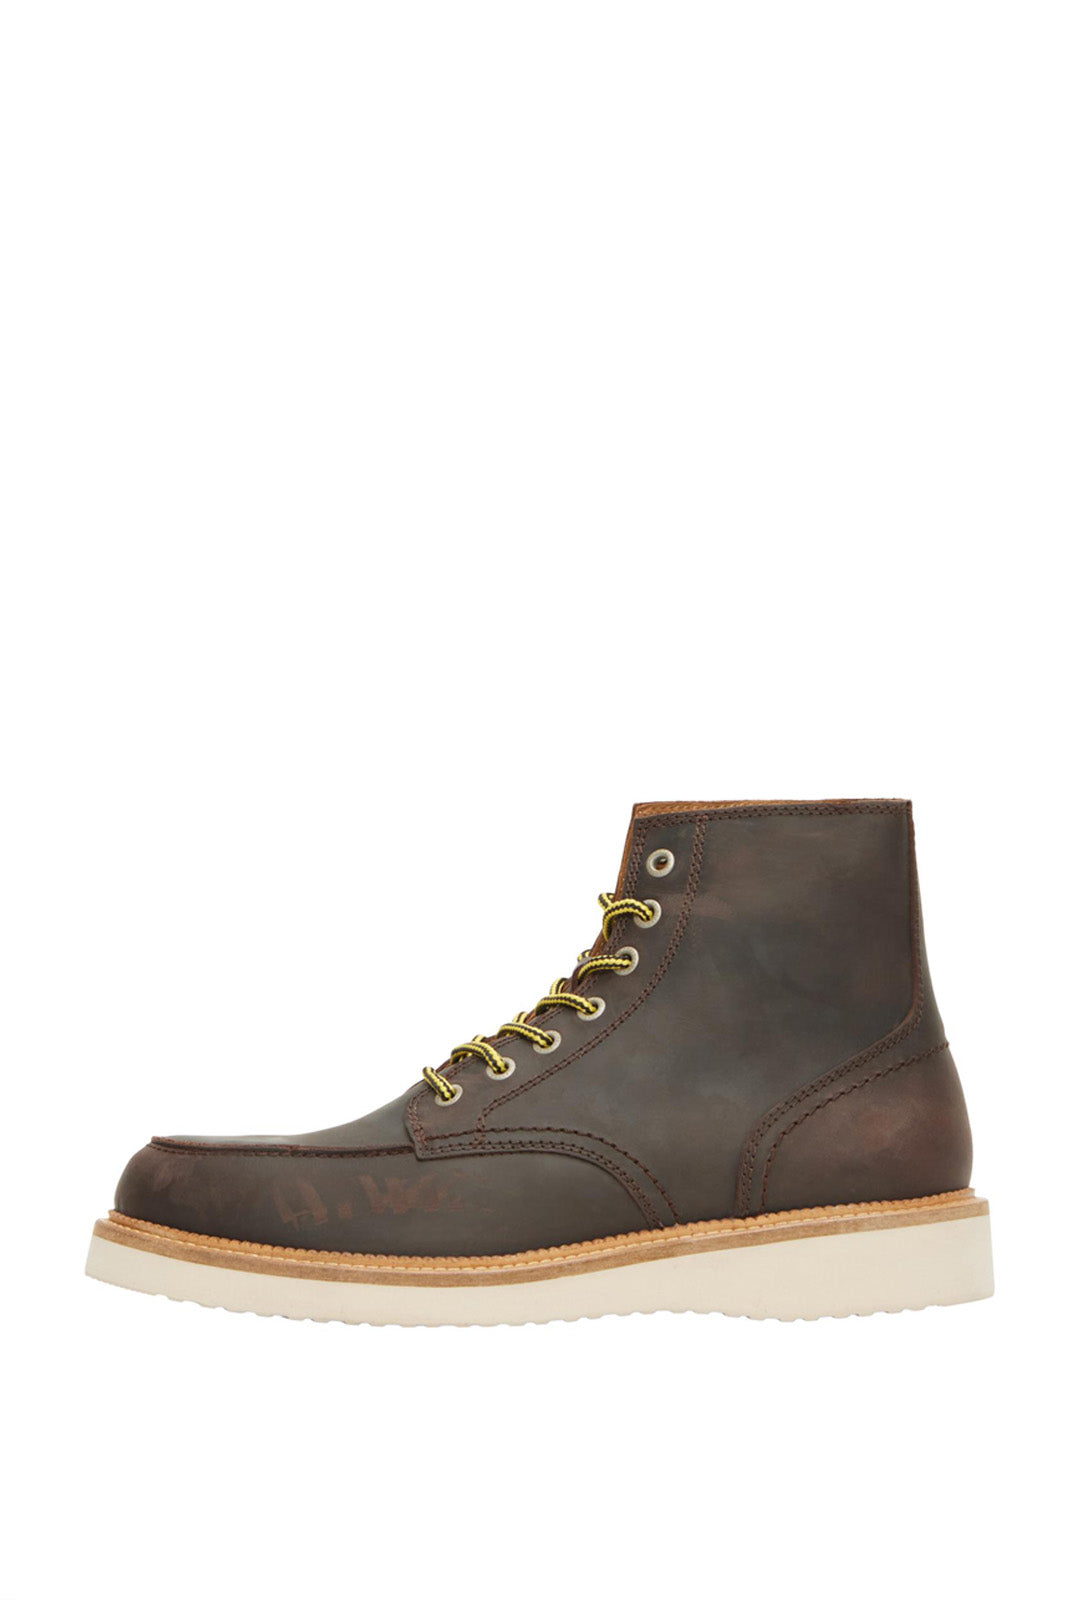 SLHTEO NEW LEATHER MOC-TOE BOOT